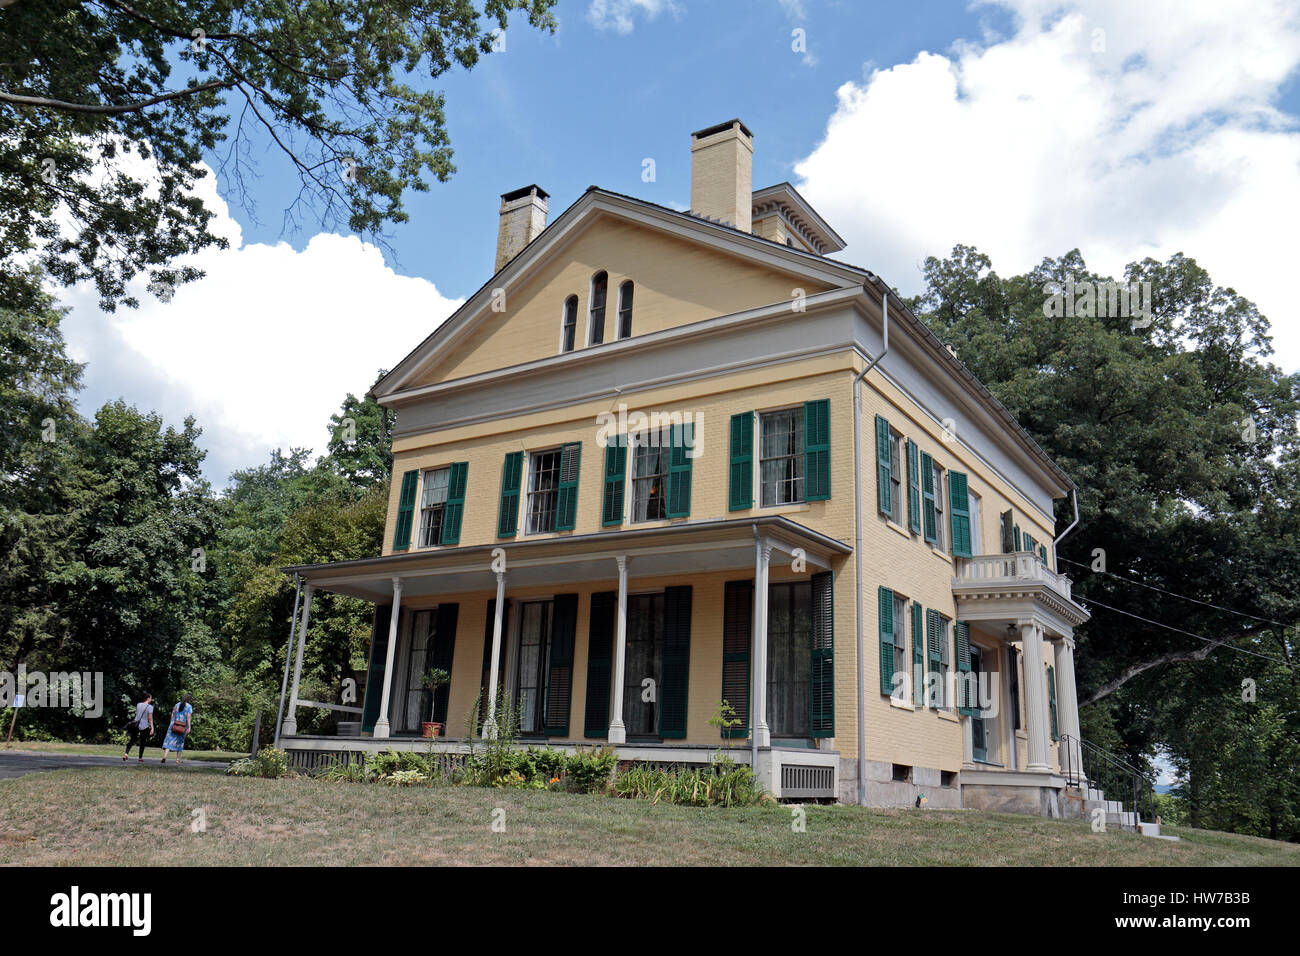 The Dickinson Homestead, part of the Emily Dickinson Museum in Amherst, Massachusetts, United States. Stock Photo